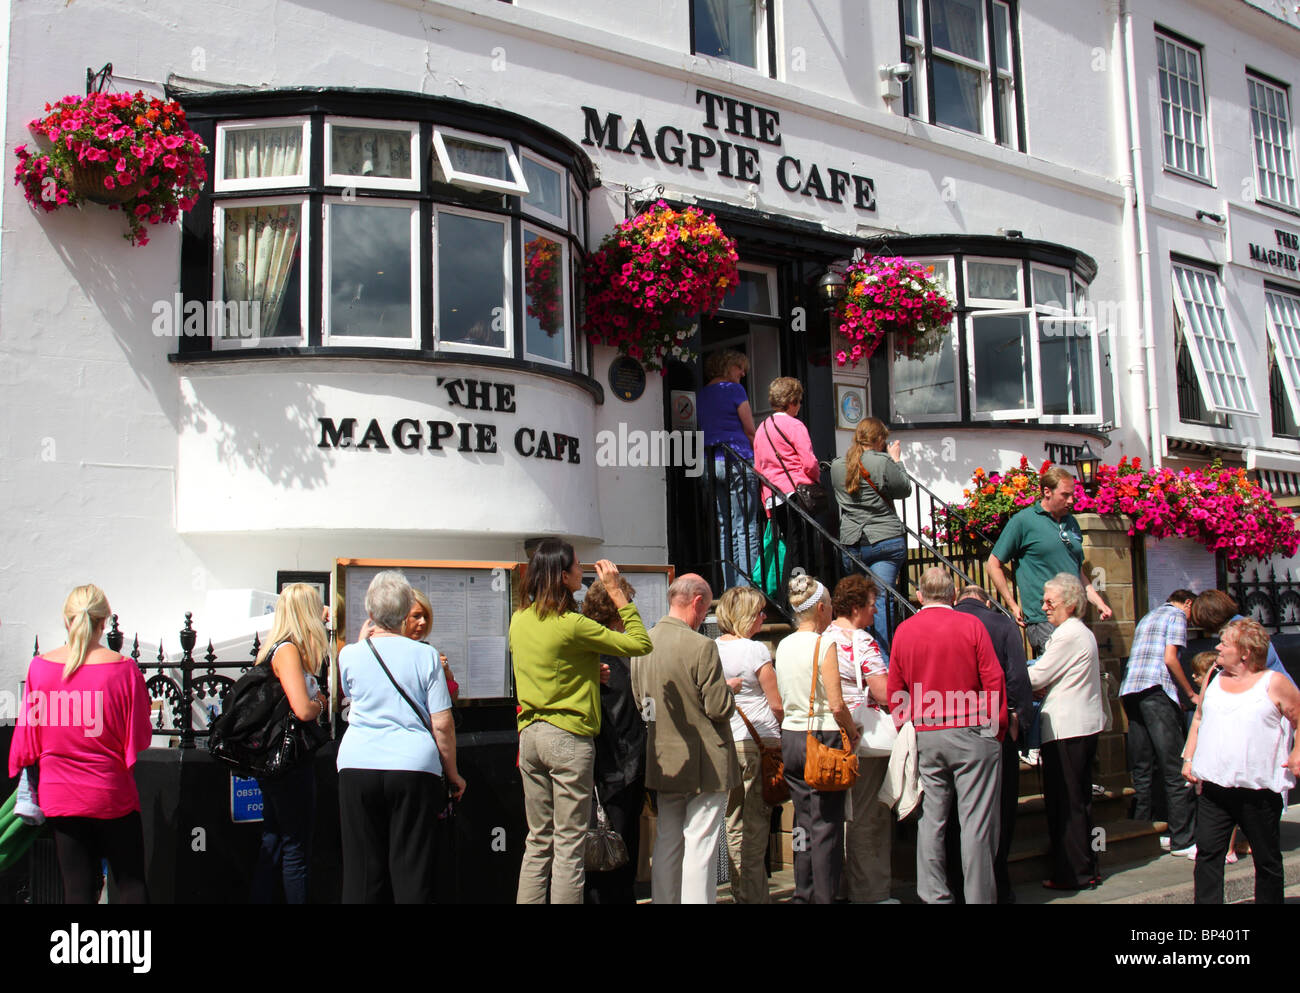 Queuing at The Magpie Cafe in Whitby. Stock Photo